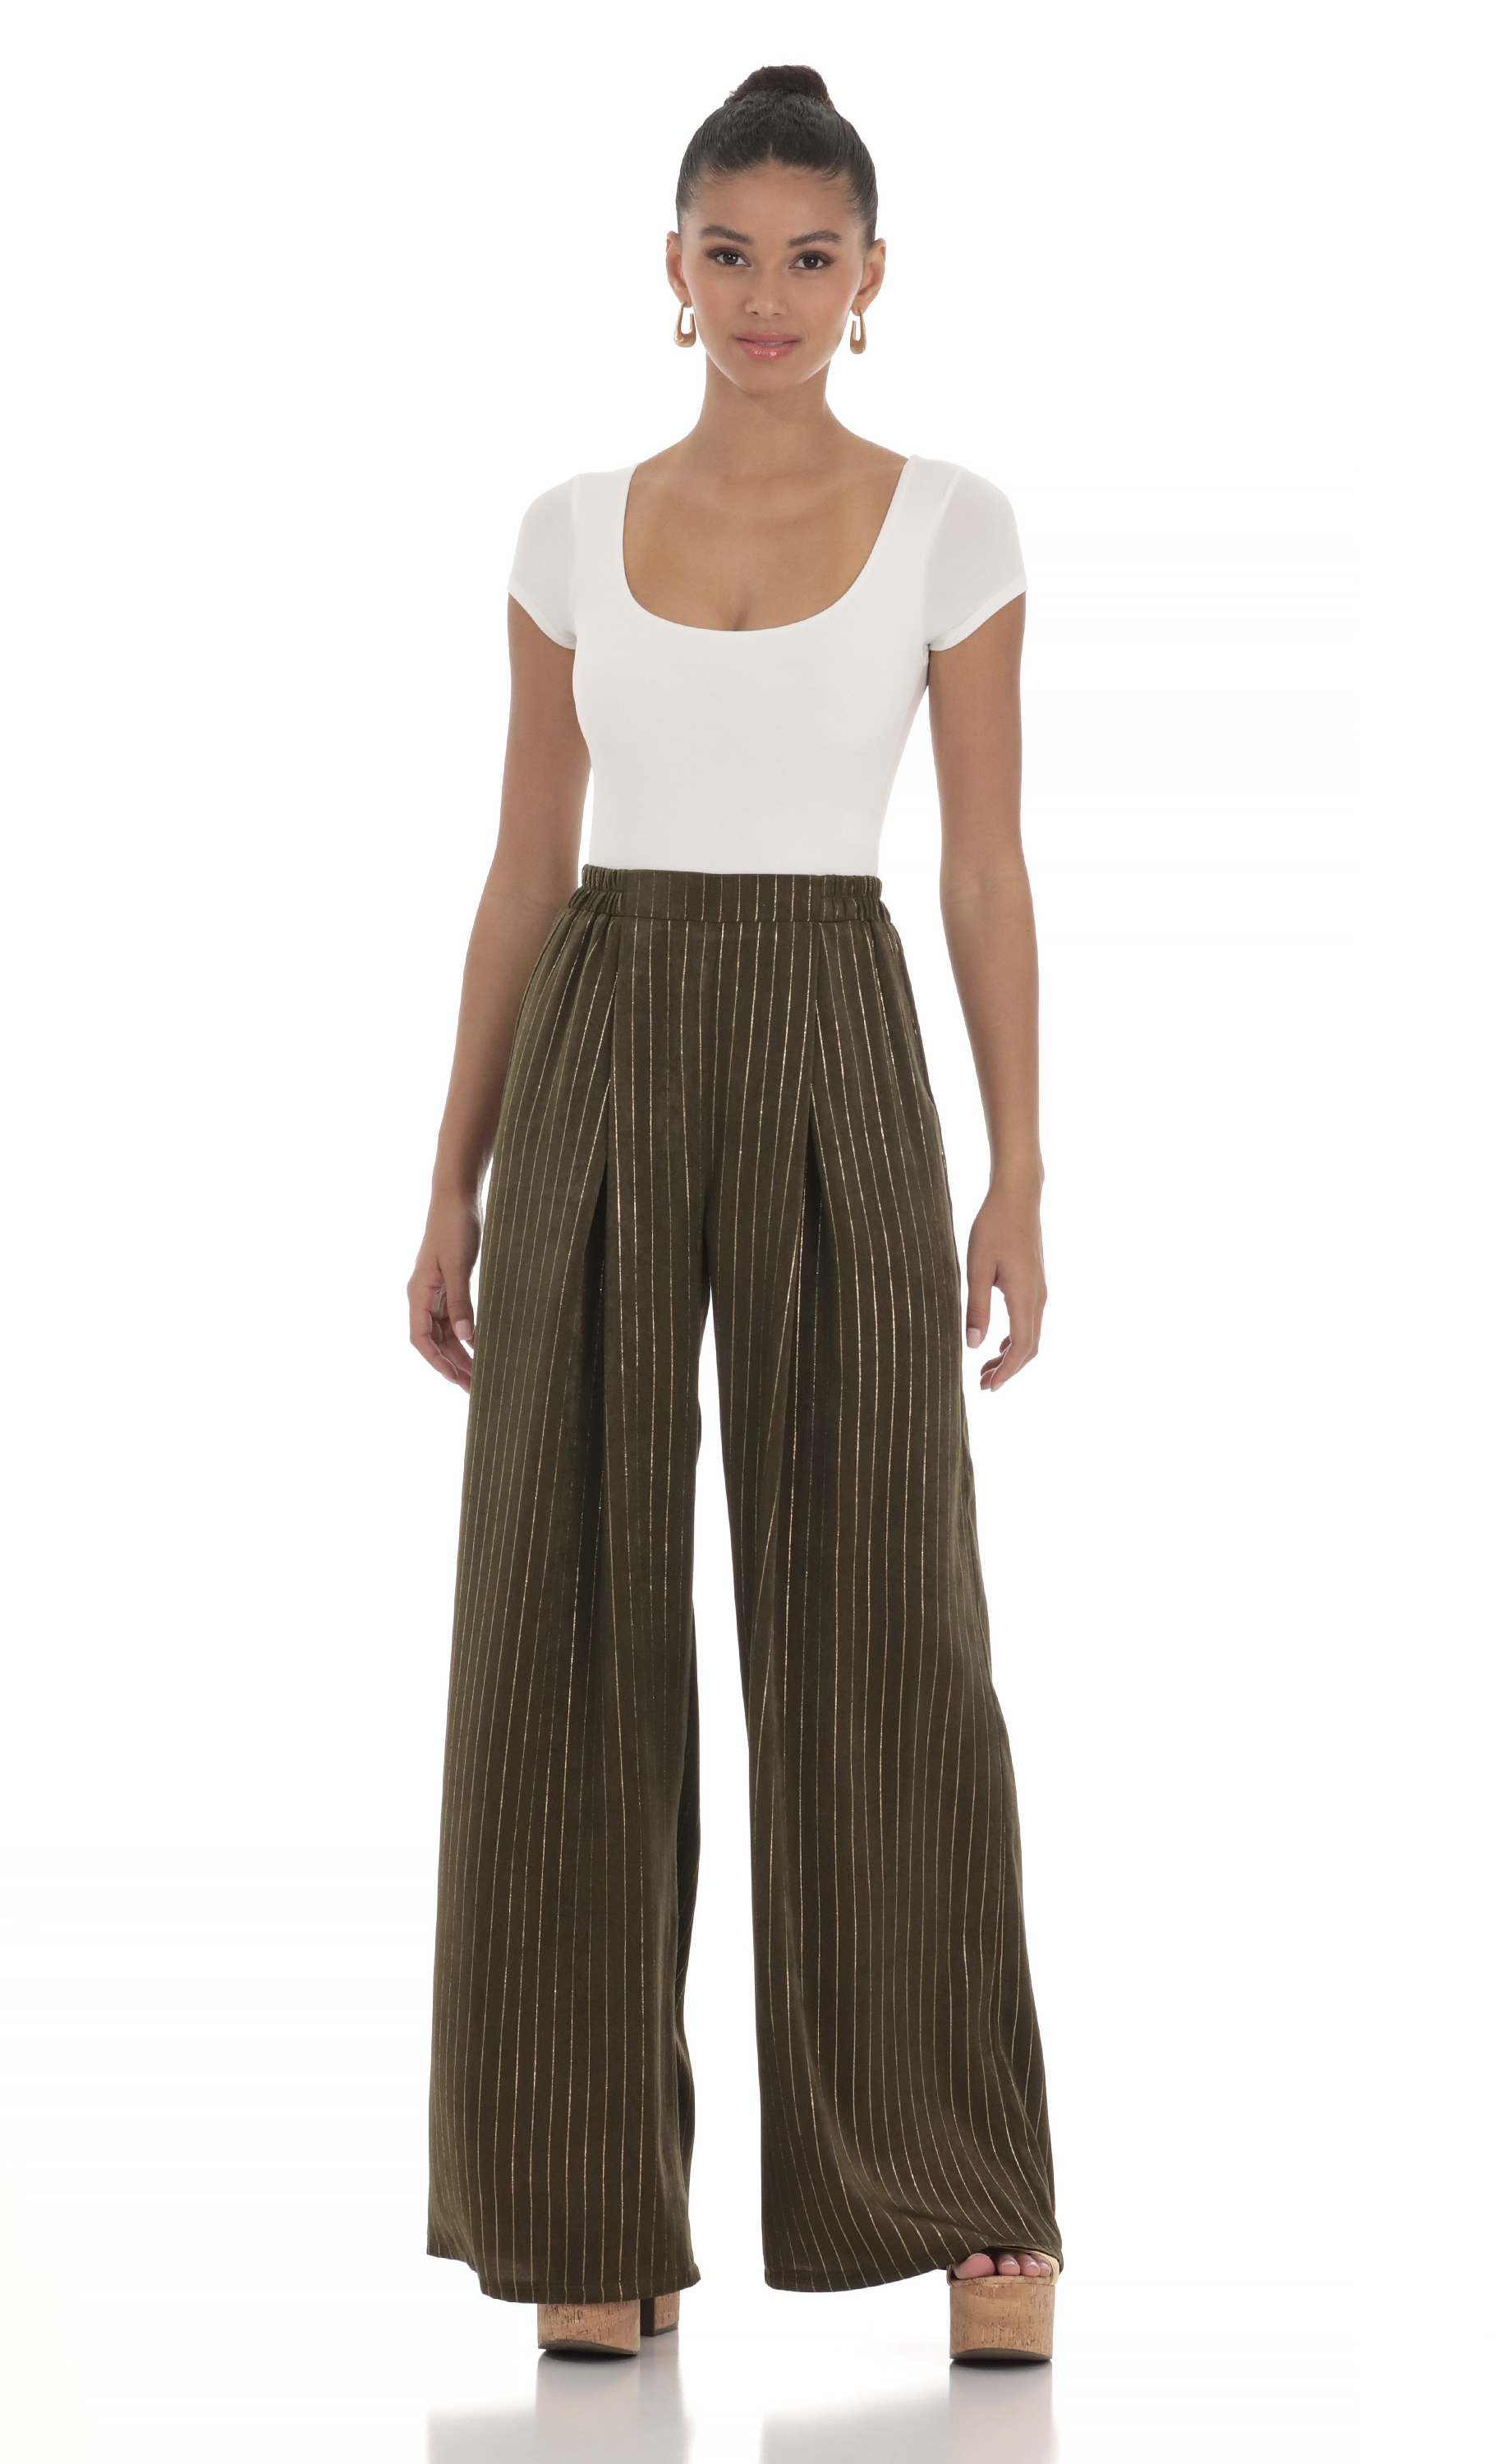 Lesly Jacquard Satin Two Piece Pant Set in Brown